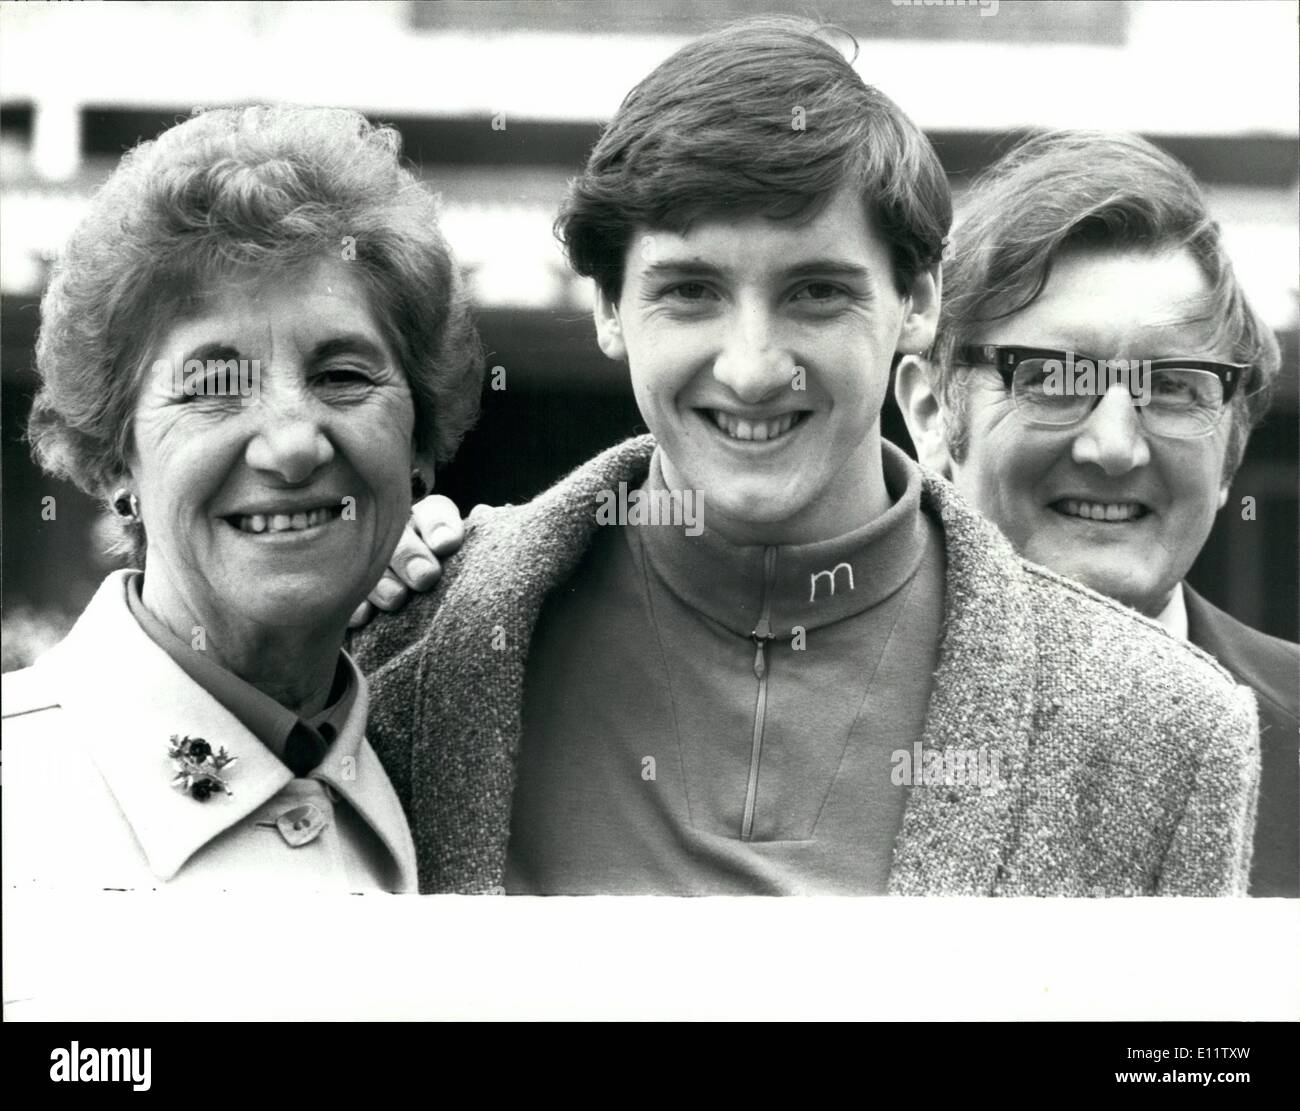 Apr. 04, 1980 - ROBIN COUSINS IS NOW A PRO At a press conference held at the Dorchester Hotel in London today,Robin Courier announced officially that he was turning pro, He will shortly be off to America to star in Ss television spectacular,hie agent declined to say what the contract wee worth. PHOTO SHOW: Robin outside the Dorchester with his, mother and father after the press conference Stock Photo